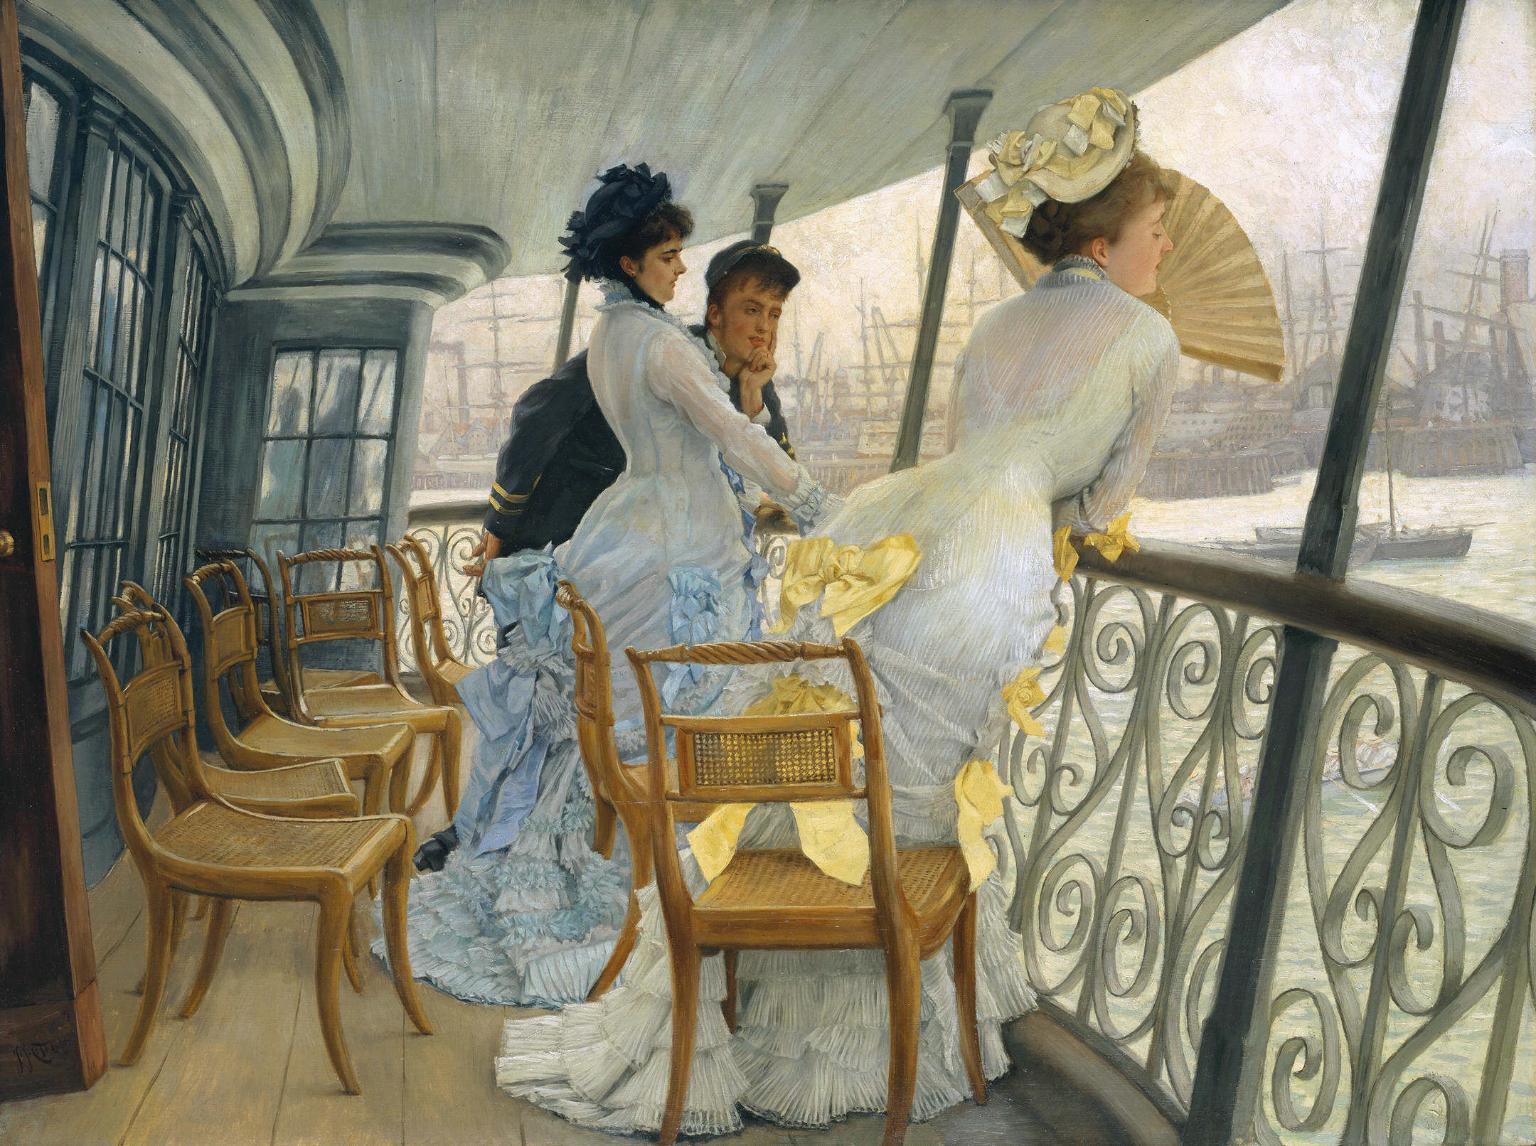 The Gallery of HMS Calcutta (Portsmouth) by James Tissot - c. 1876 - 86,6 × 109,5 cm Tate Britain